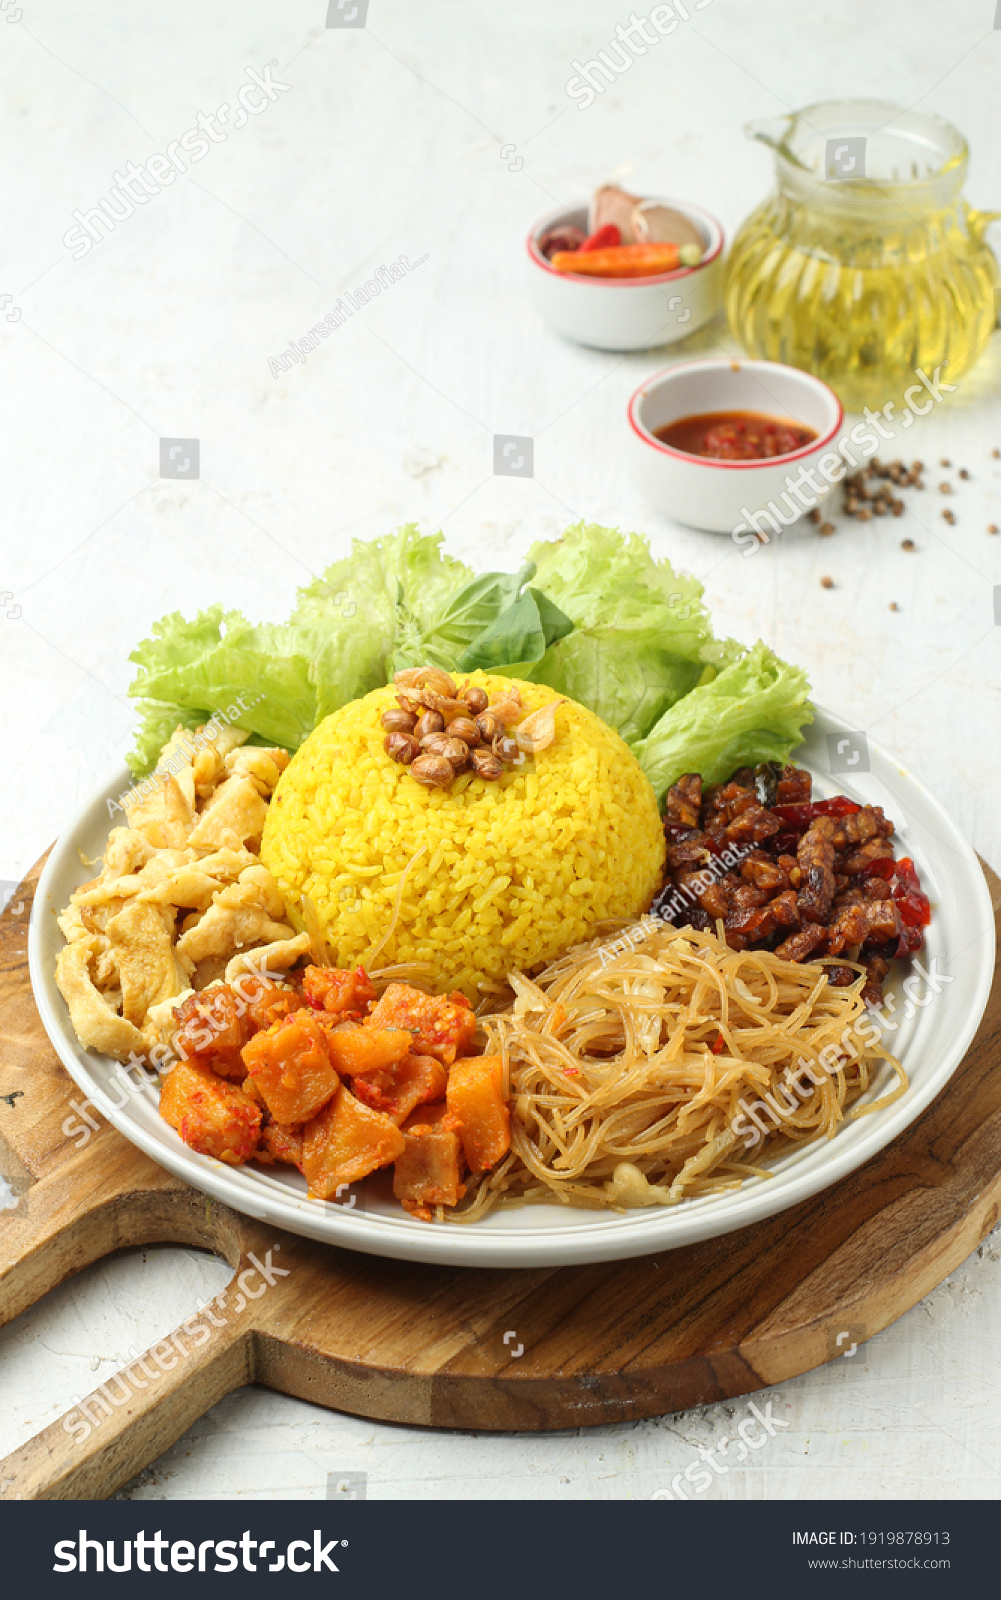 Nasi kuning or Nasi kuning is a popular breakfast in Indonesia served with vermicelli, eggs and chili sauce, it tastes delicious #1919878913